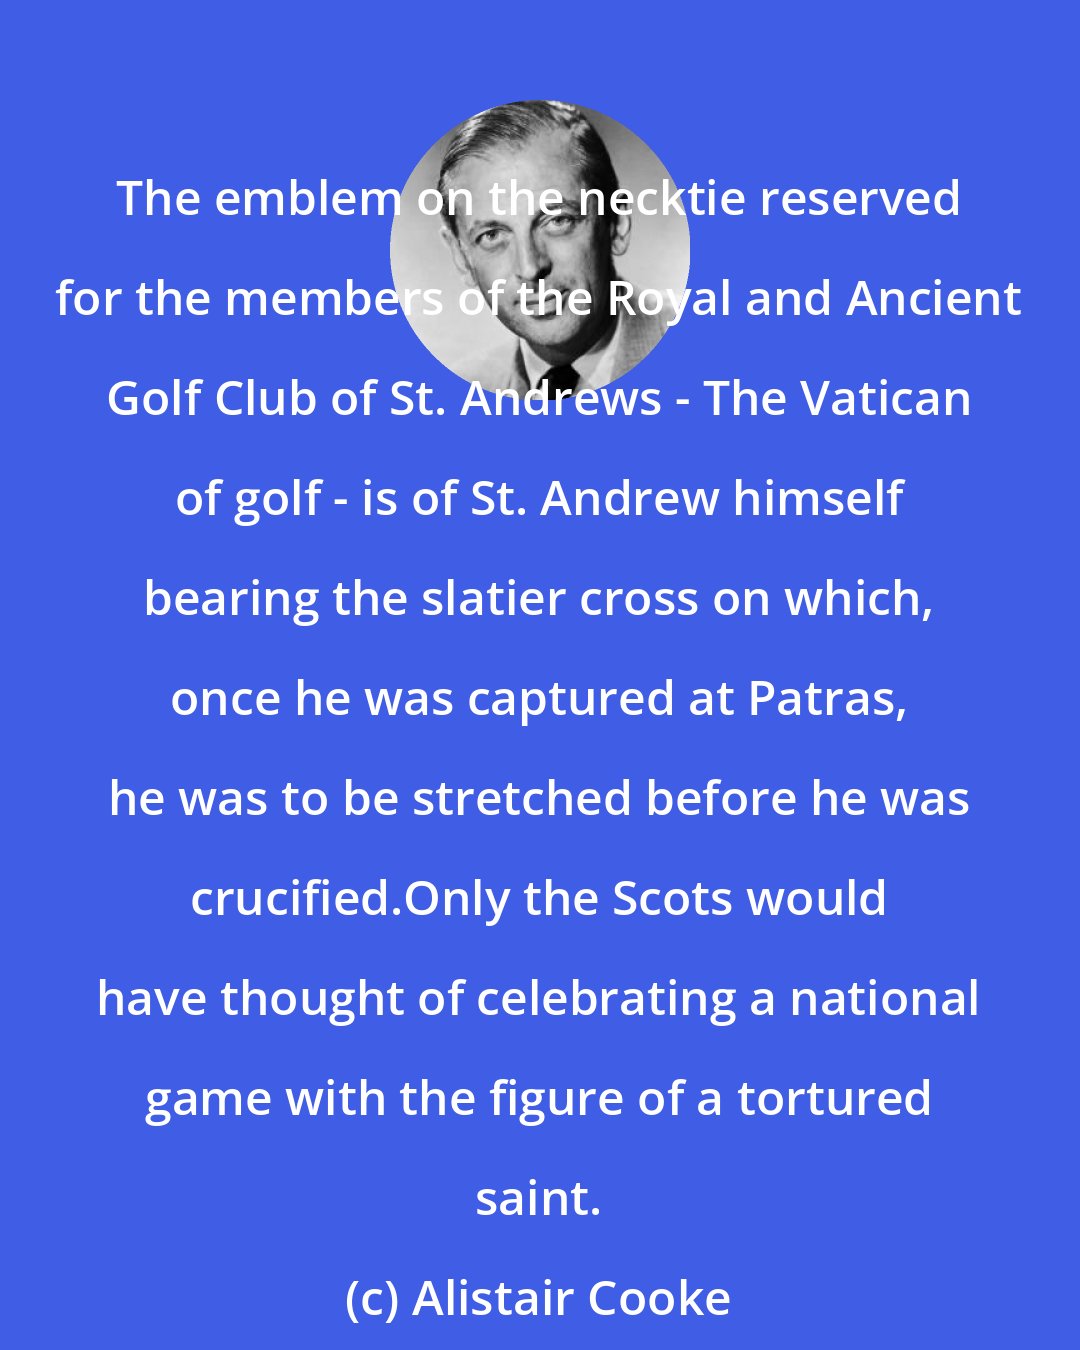 Alistair Cooke: The emblem on the necktie reserved for the members of the Royal and Ancient Golf Club of St. Andrews - The Vatican of golf - is of St. Andrew himself bearing the slatier cross on which, once he was captured at Patras, he was to be stretched before he was crucified.Only the Scots would have thought of celebrating a national game with the figure of a tortured saint.